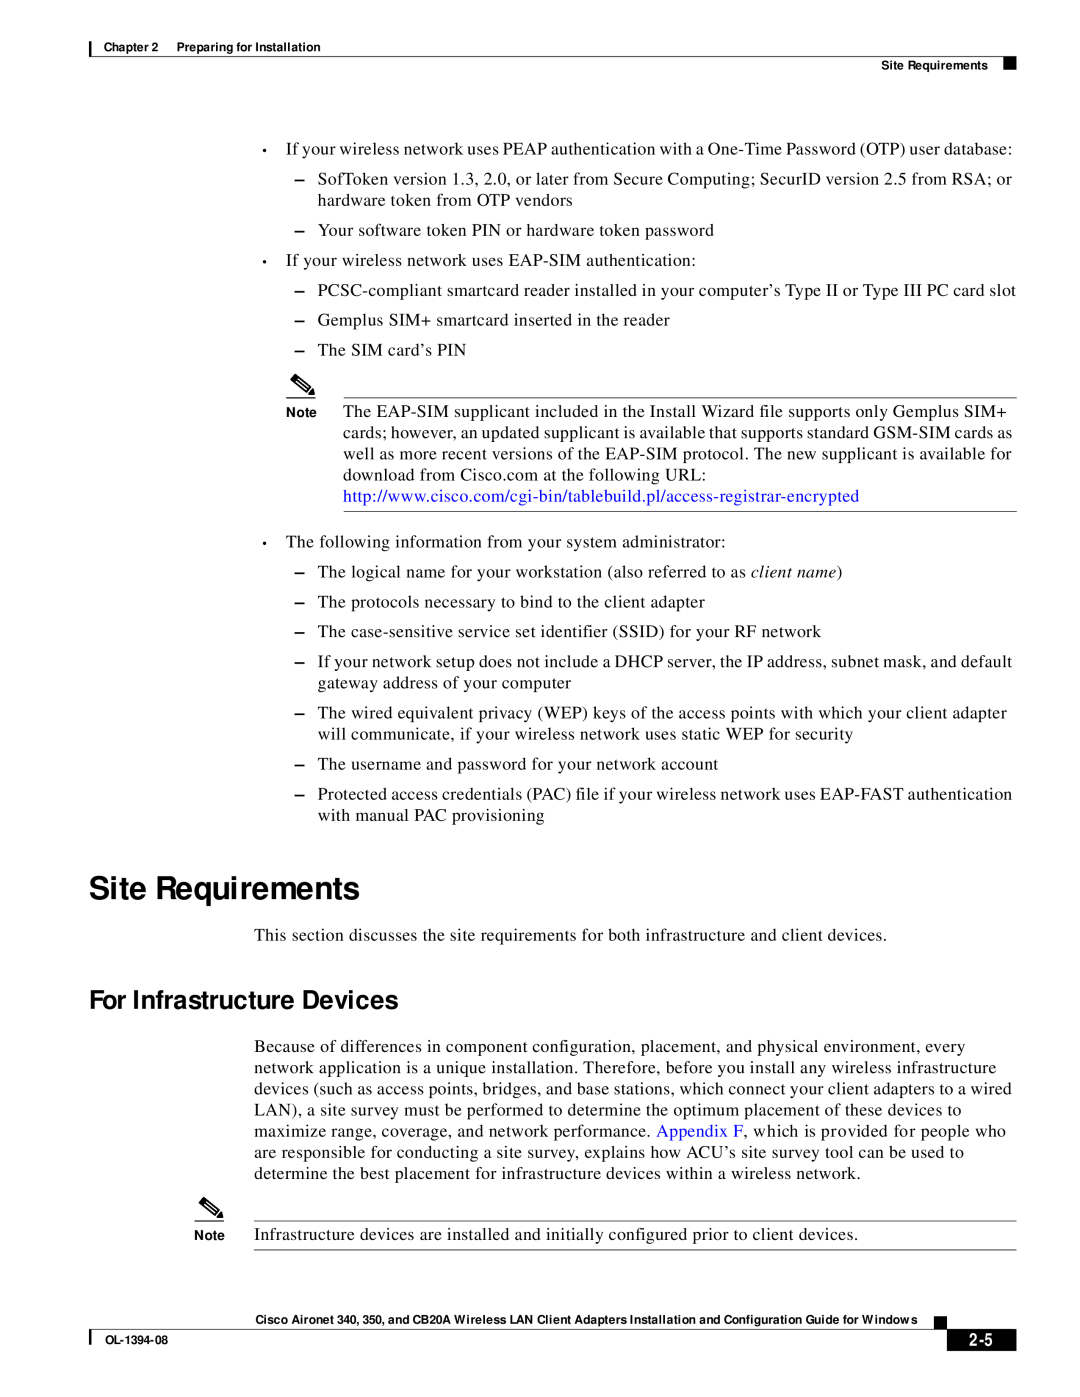 Cisco Systems CB20A, 350 manual Site Requirements, For Infrastructure Devices 